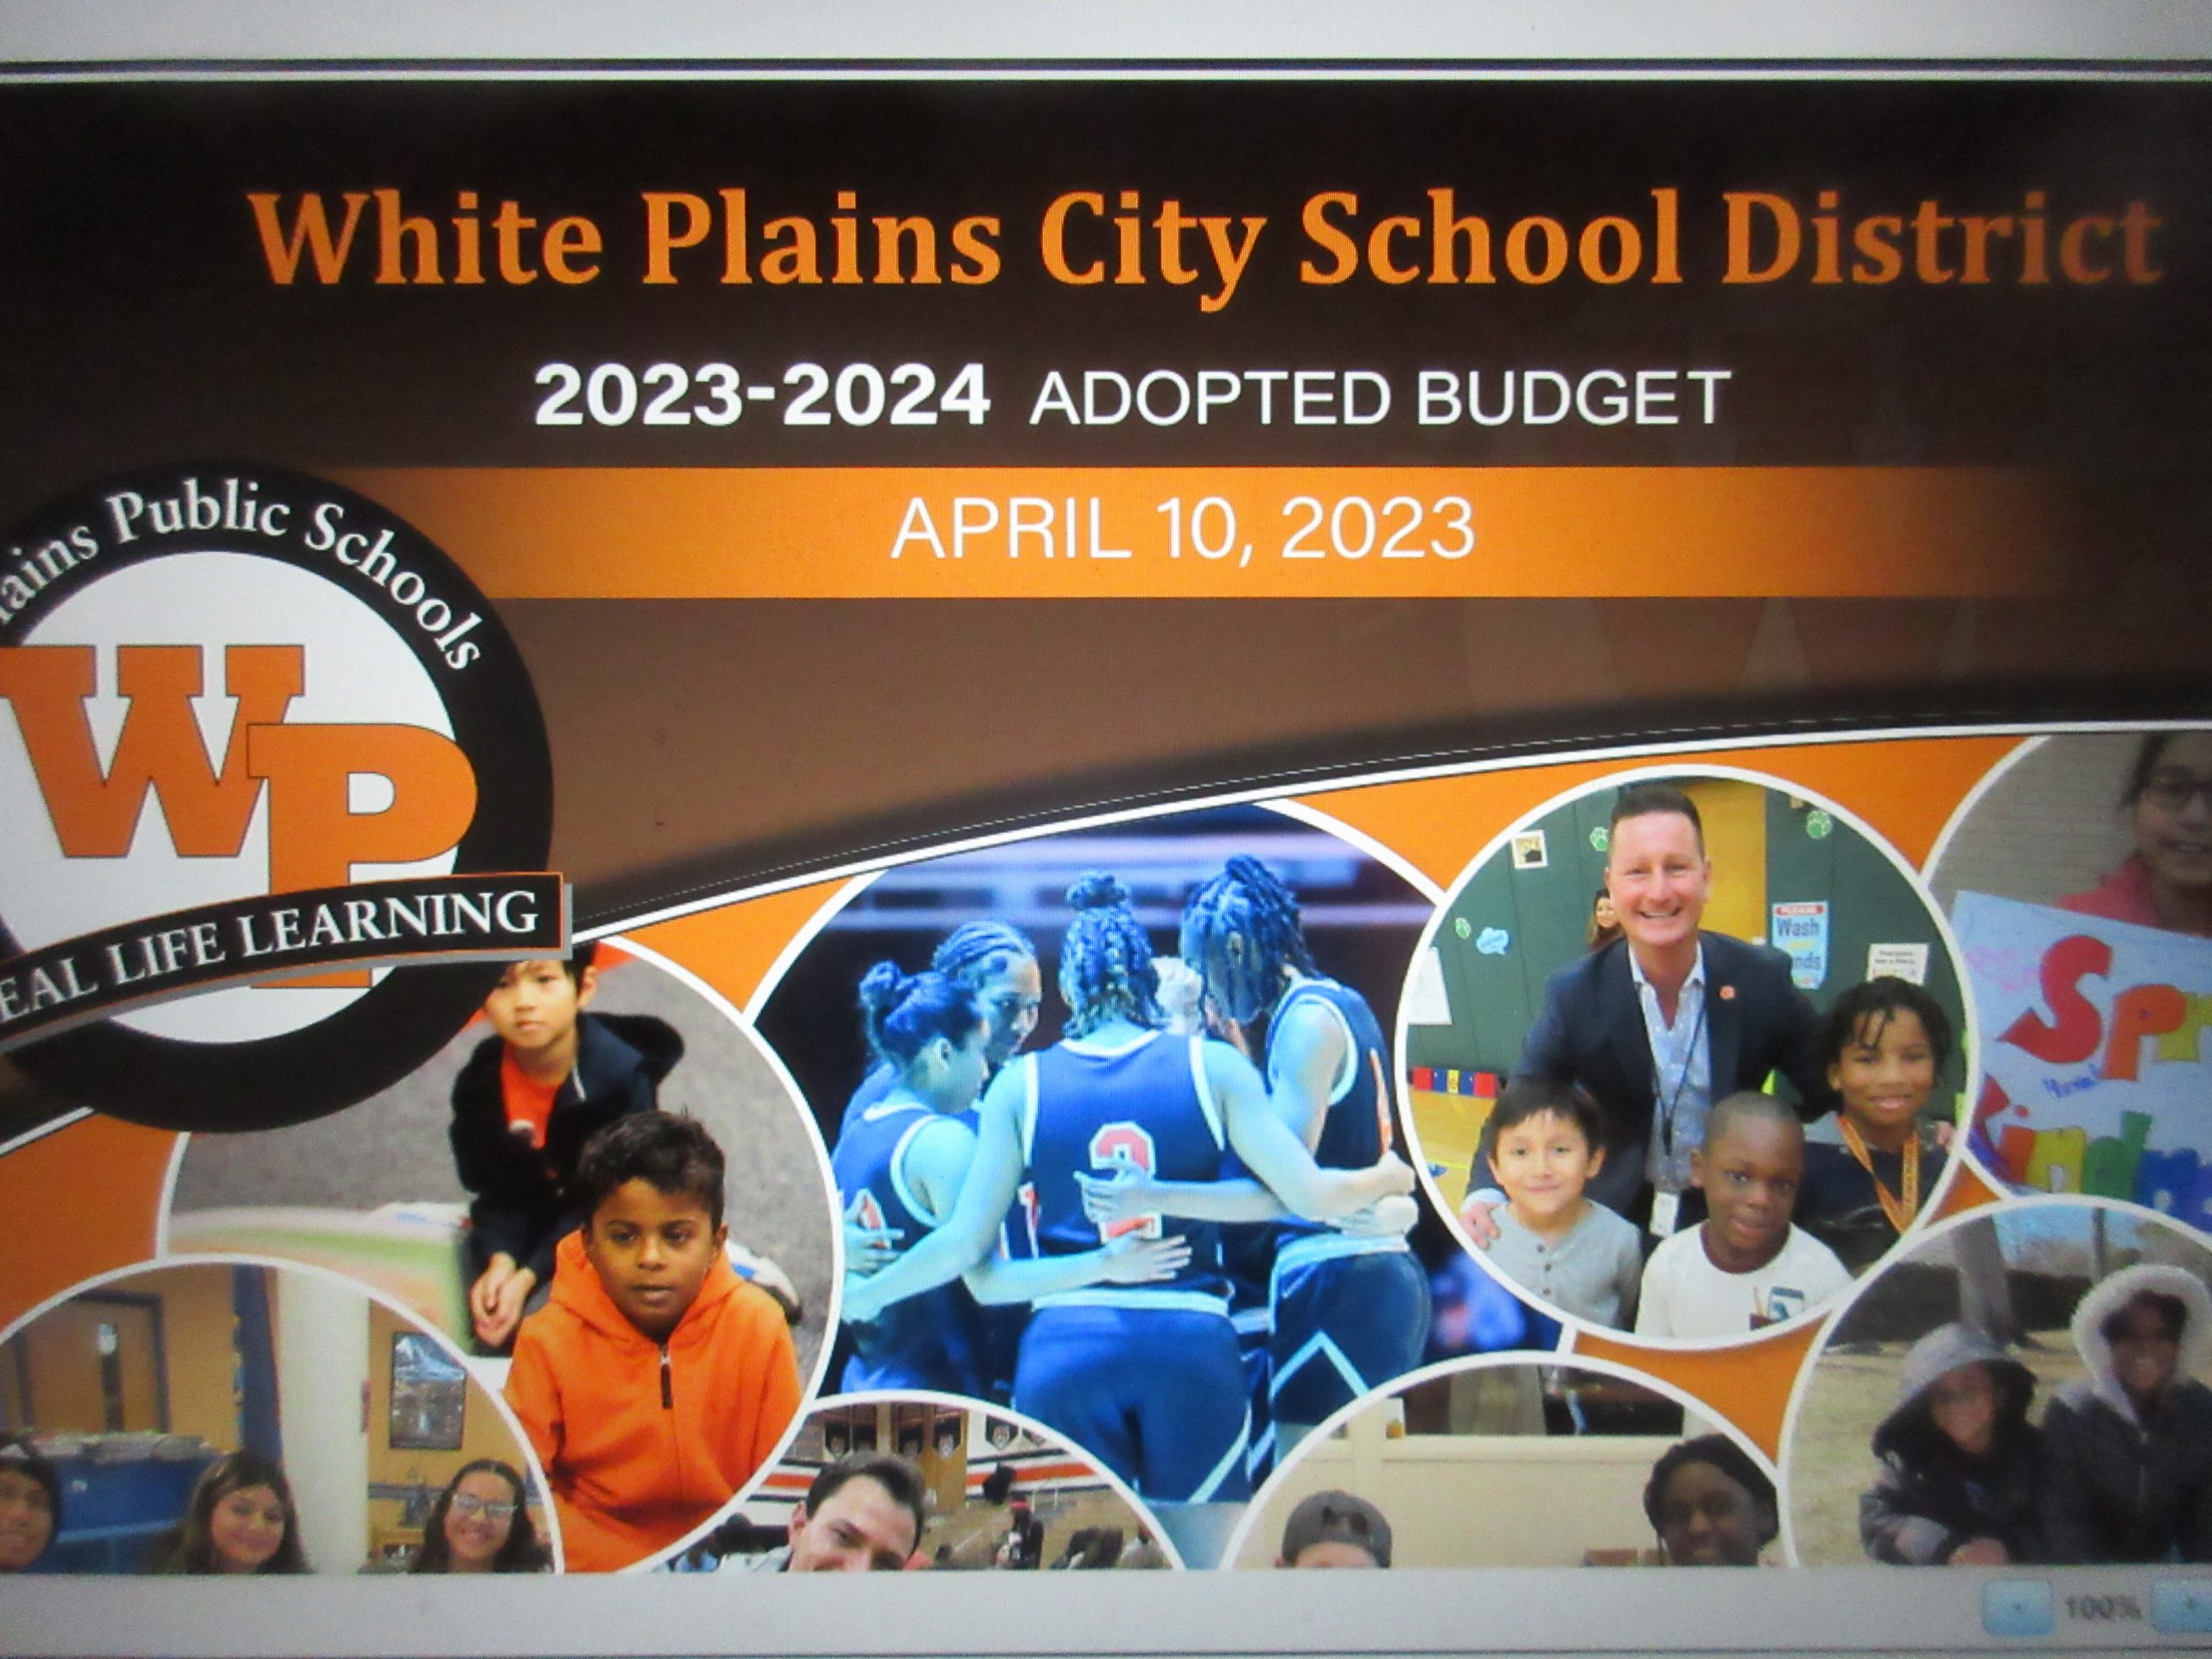 WHITE PLAINS CITIZENETREPORTER 2022-2023 READERS 857,776 PERSONS MADE 2,874,840 VISITS OCT 1,2022 TO OCT 1 2023